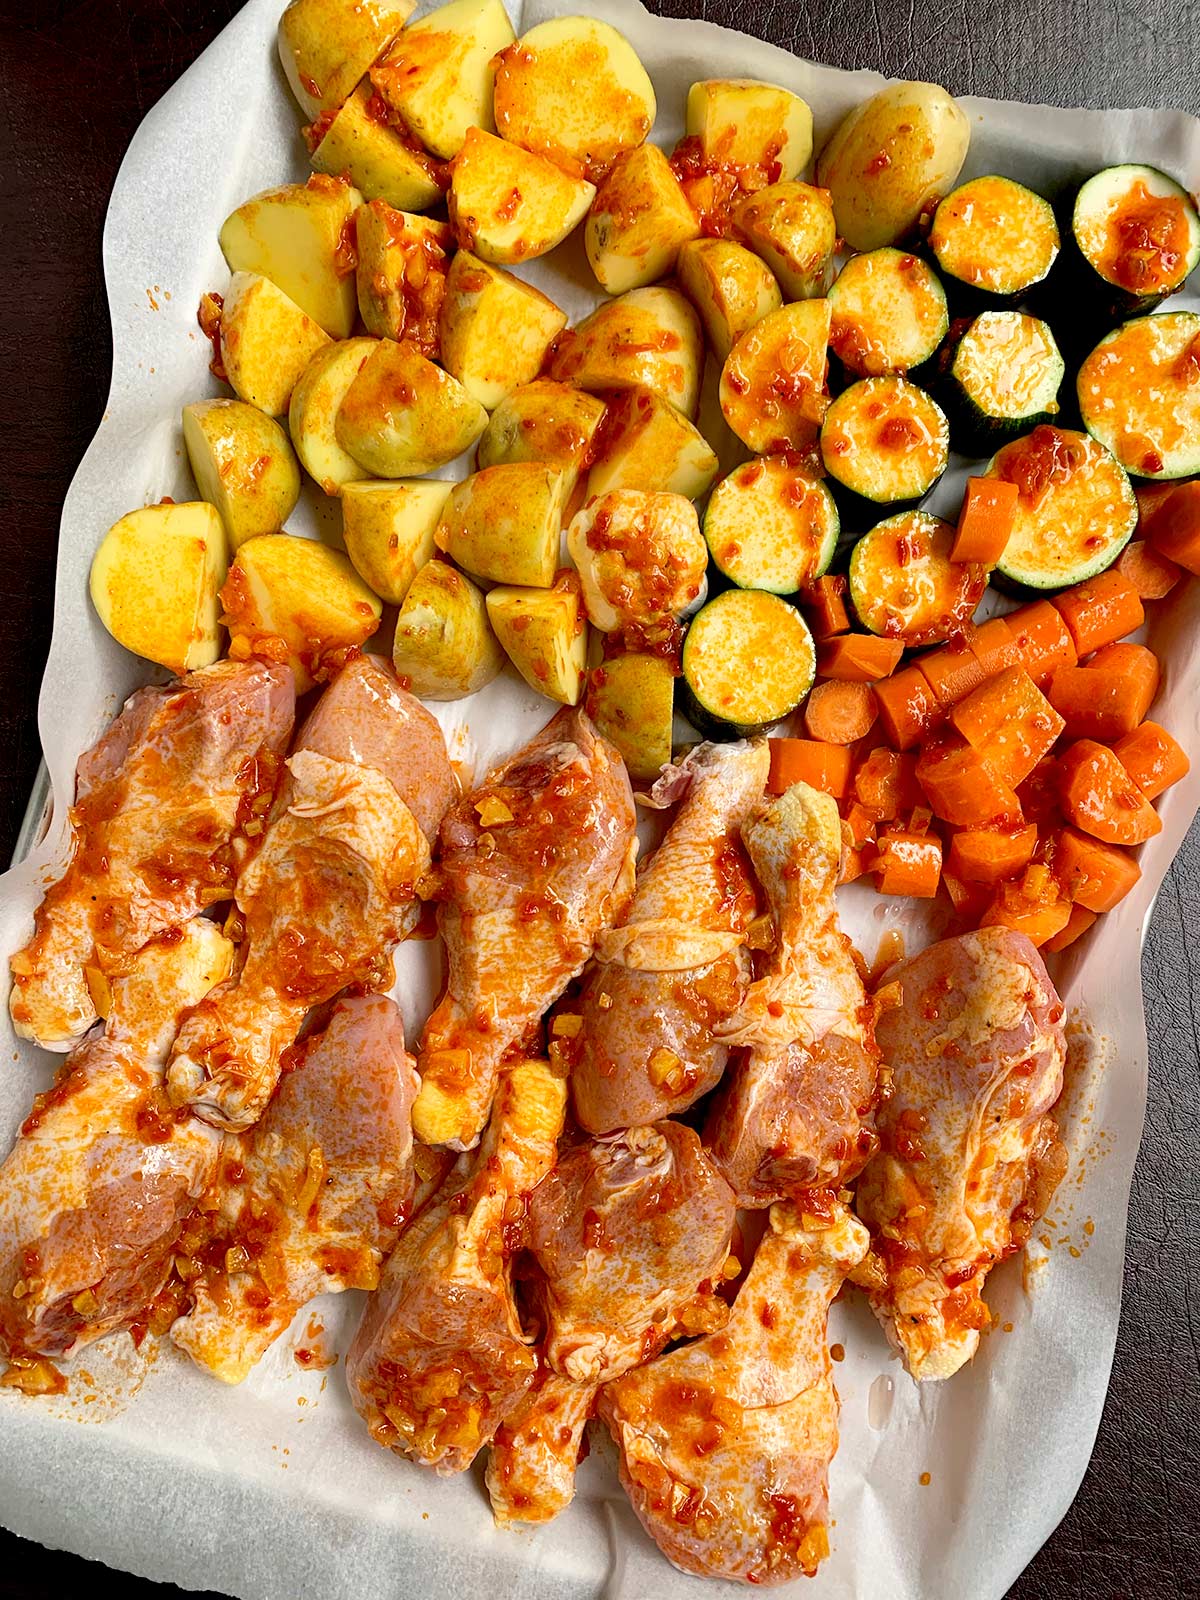 Tray of chicken legs and carrots, potatoes and zucchini with harissa sauce.